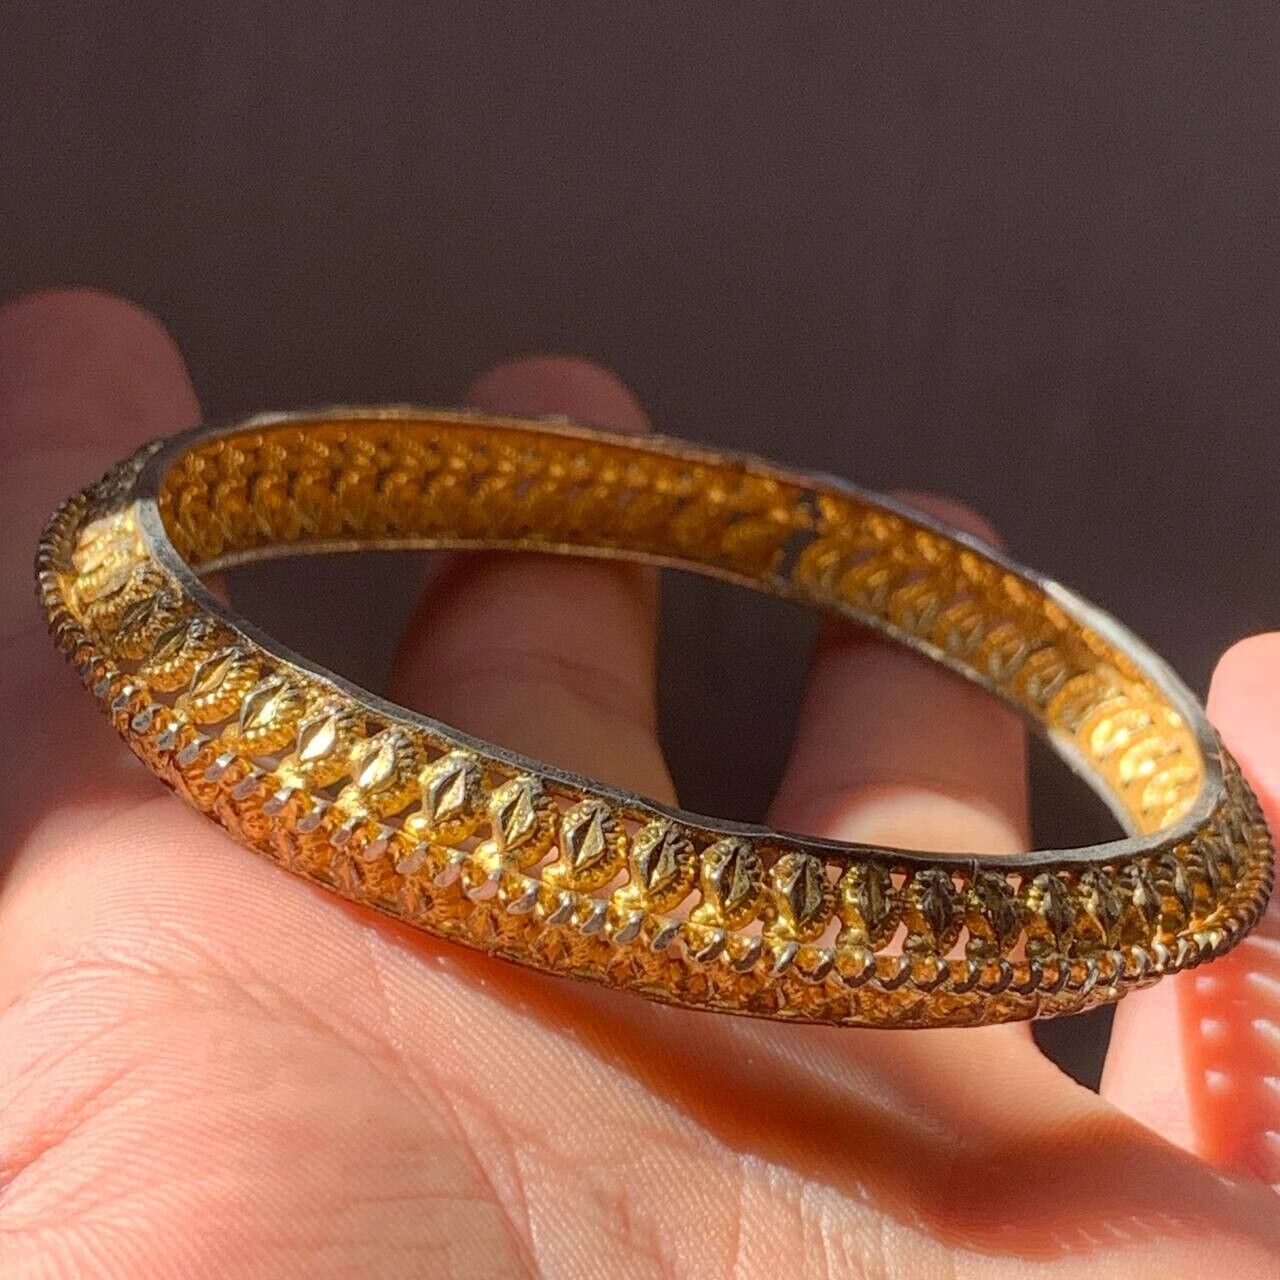 EXTREMELY RARE ANCIENT VIKING TWISTED BRACELET VINTAGE ARTIFACT AUTHENTIC